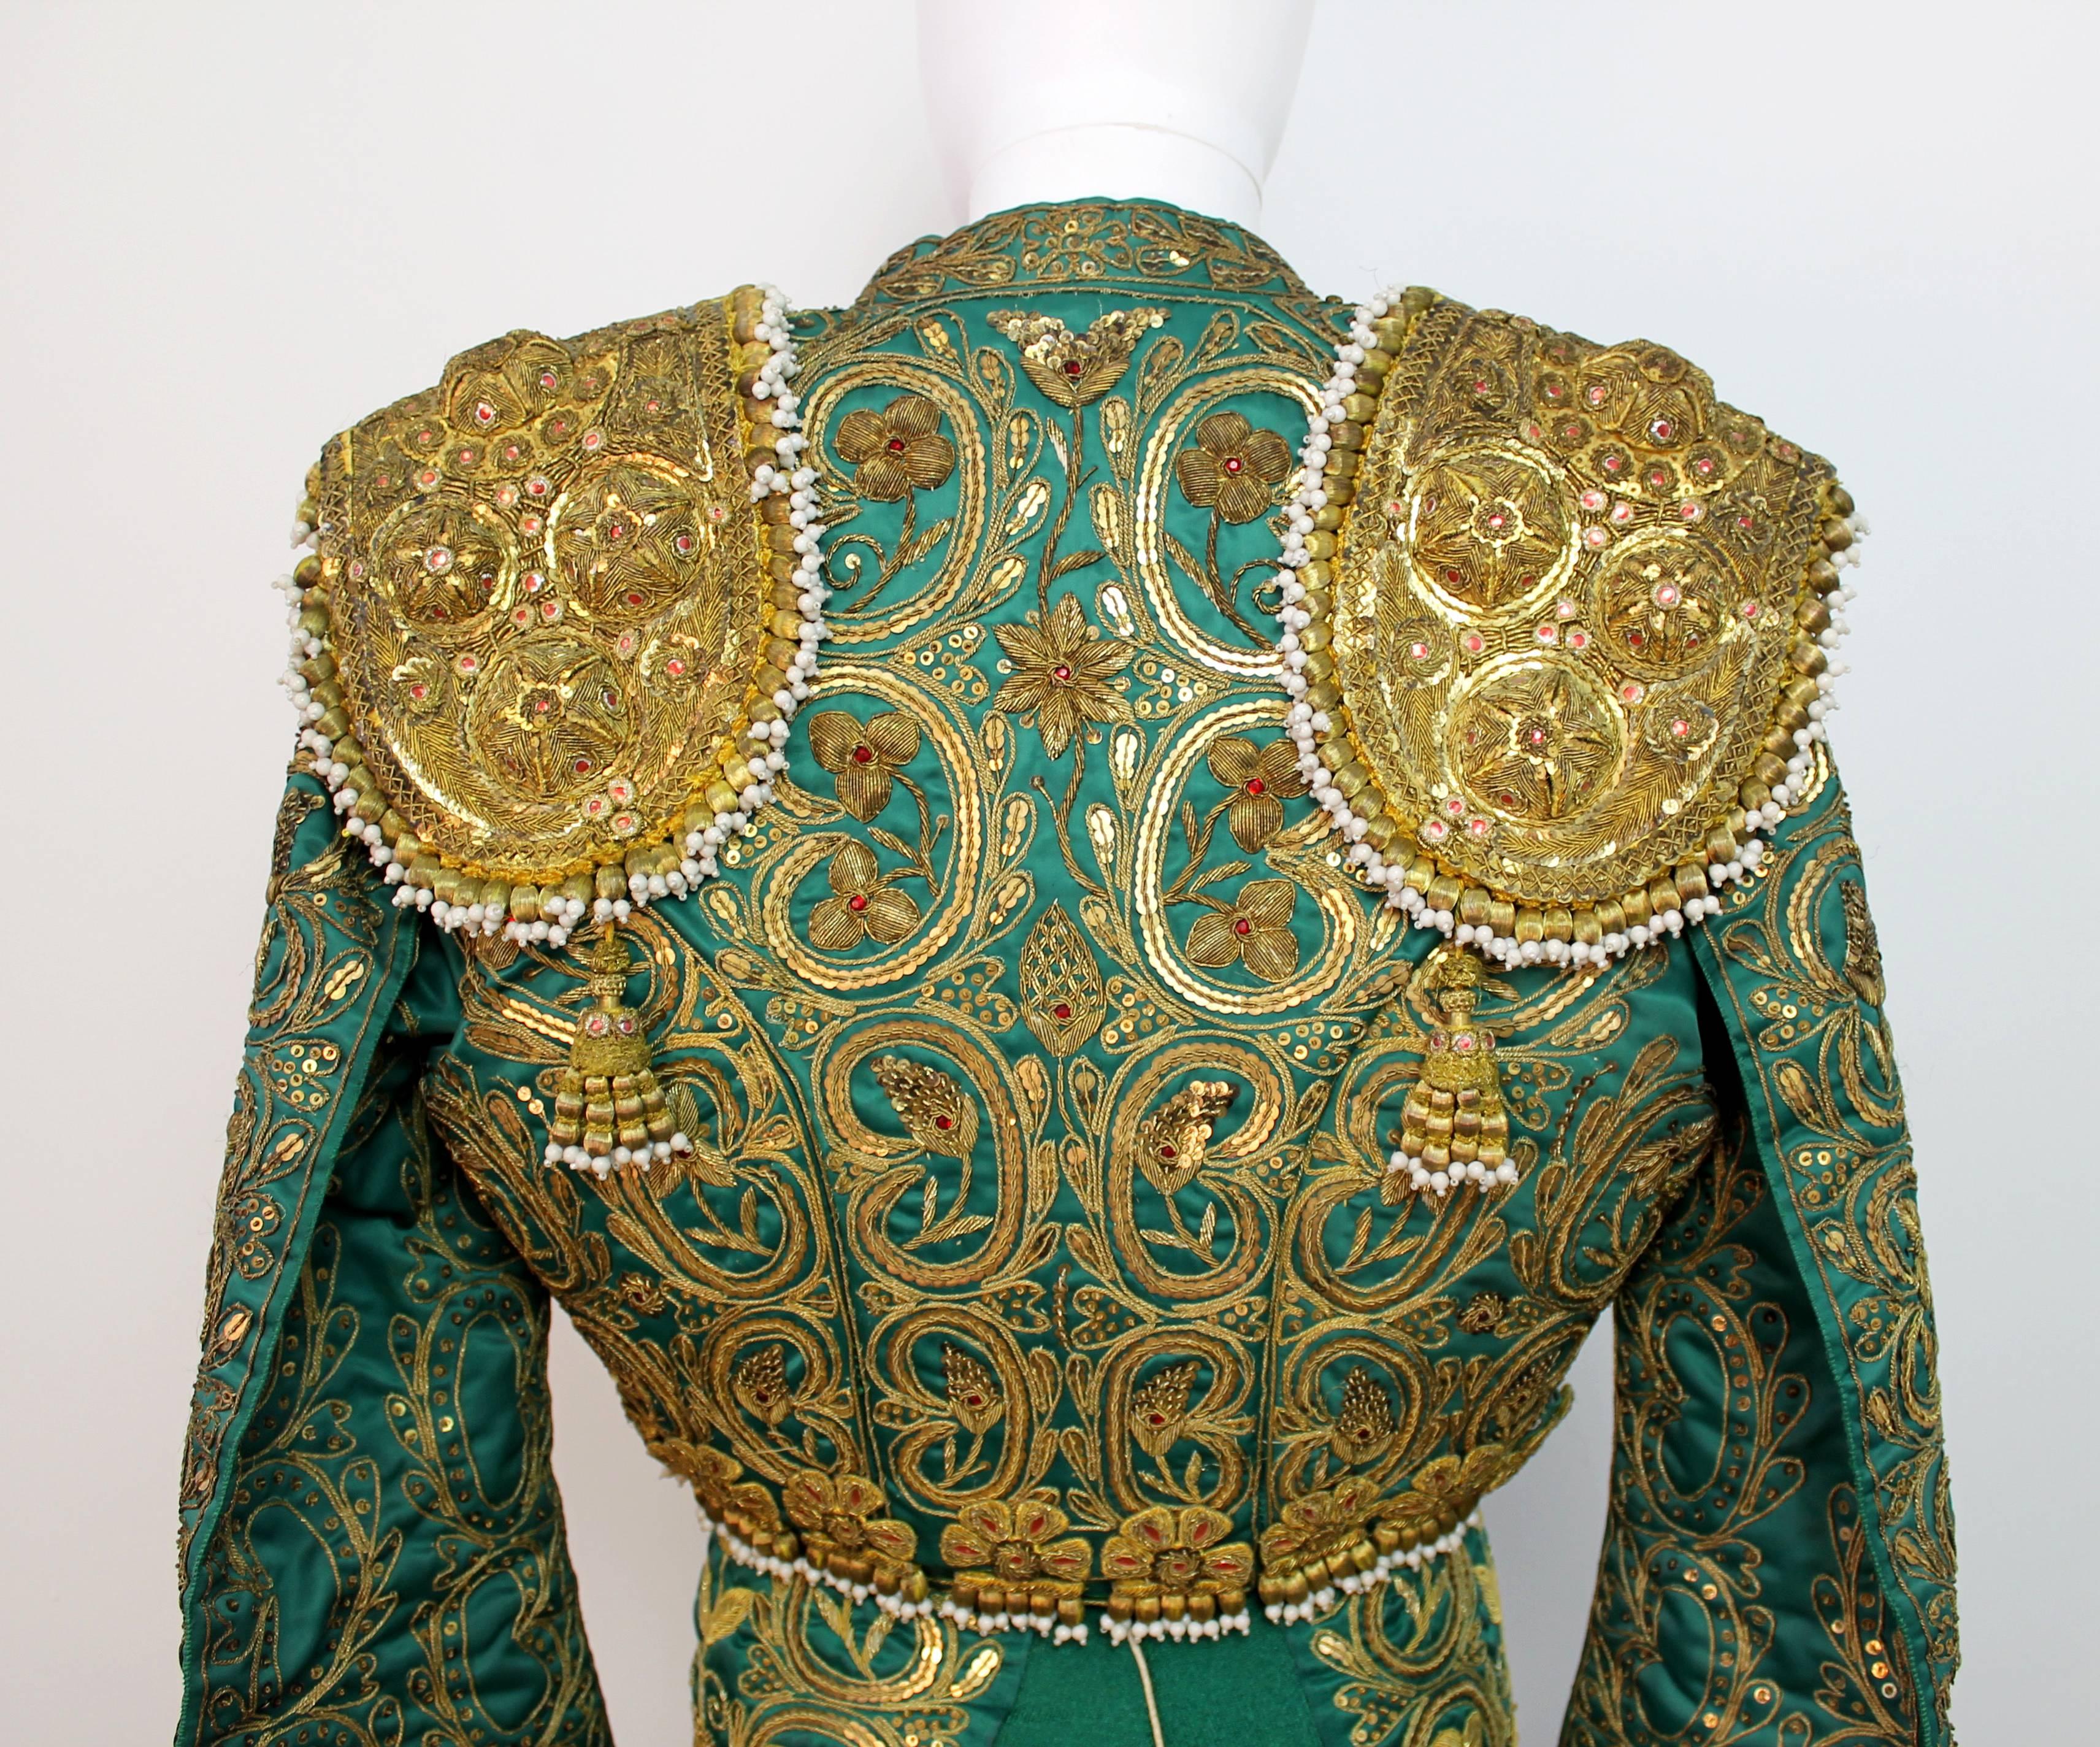 Women's or Men's Vintage Maestra Nati Green and Gold Matador Suit